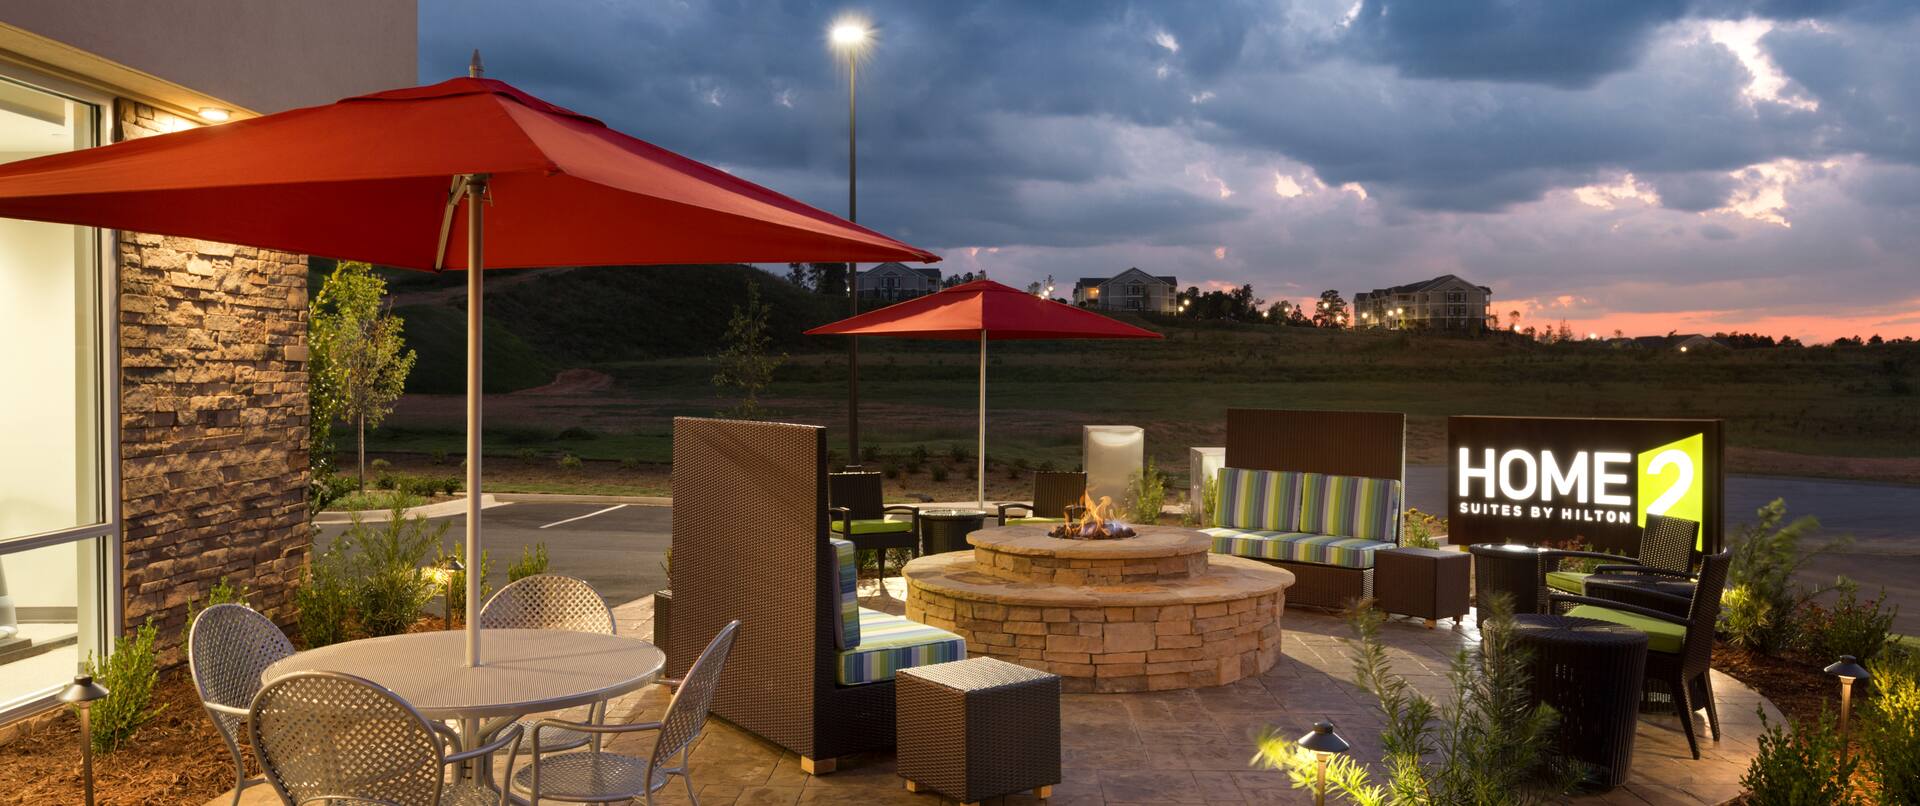 Outdoor Lounge with Fire Pit Table at Dusk